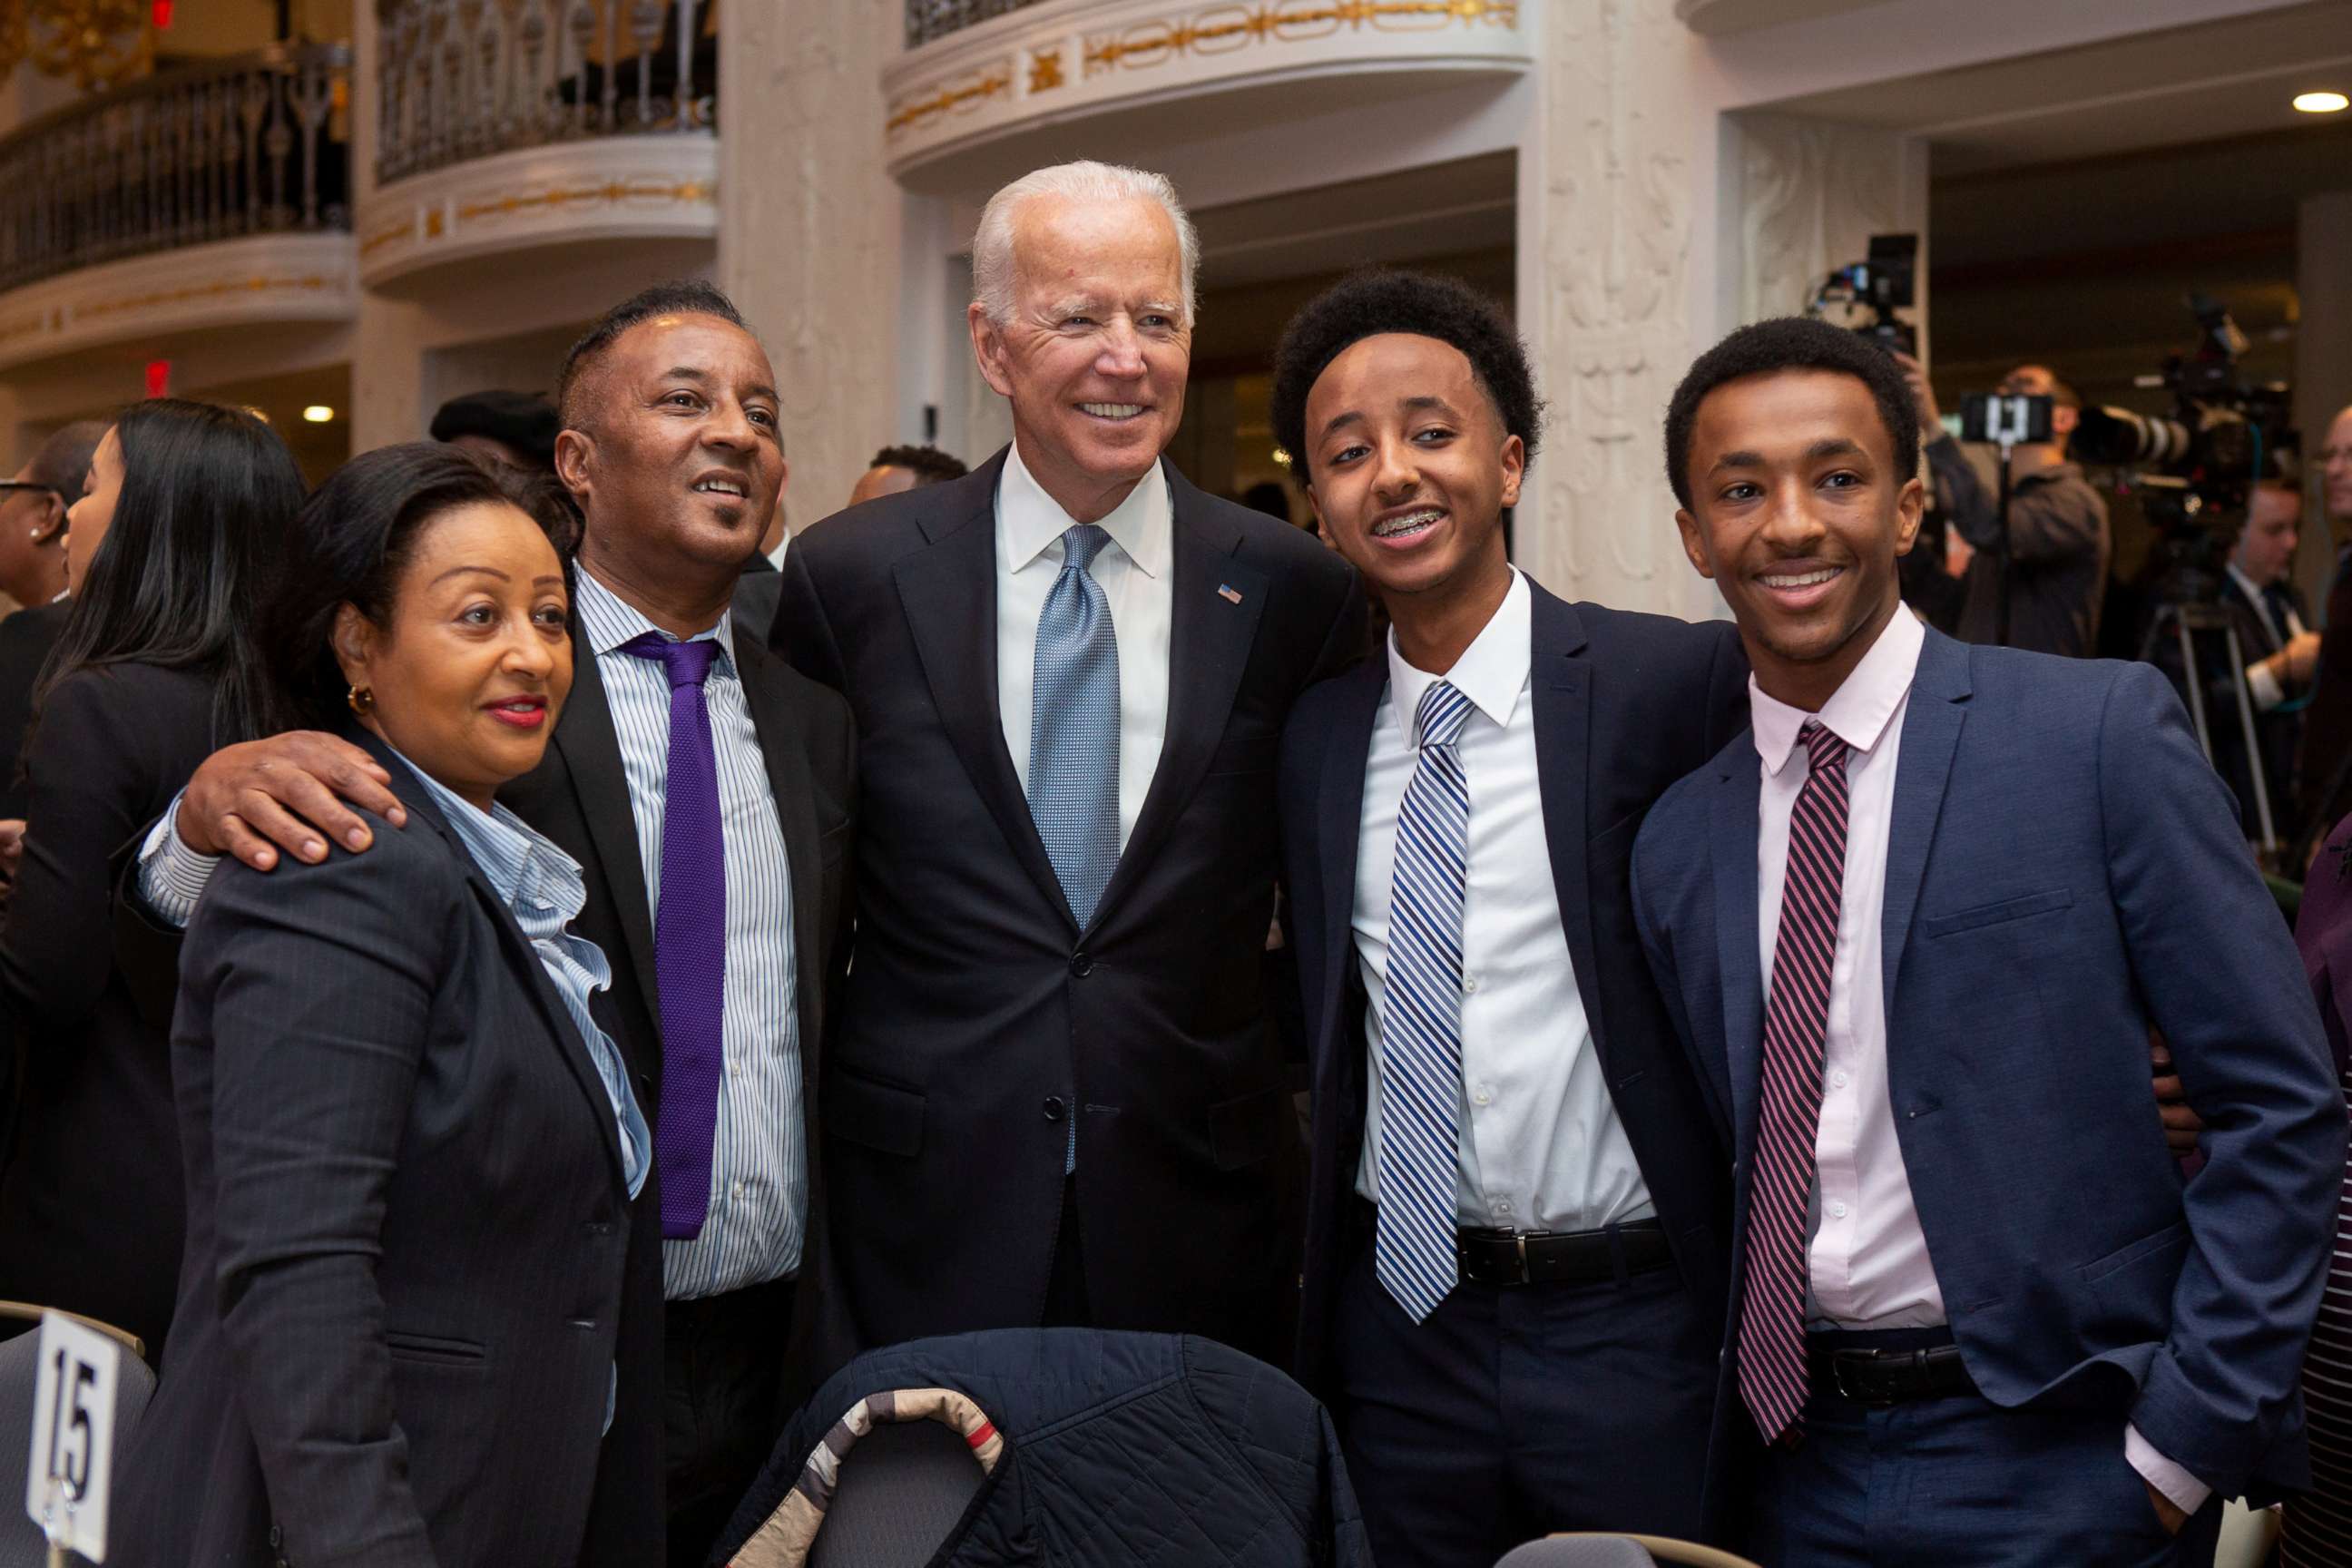 PHOTO: Joe Biden poses for a photo with fellow attendees at the annual Martin Luther King, Jr. Day Breakfast hosted by Rev. Al Sharpton and National Action Network in Washington D.C., Jan. 21, 2019.